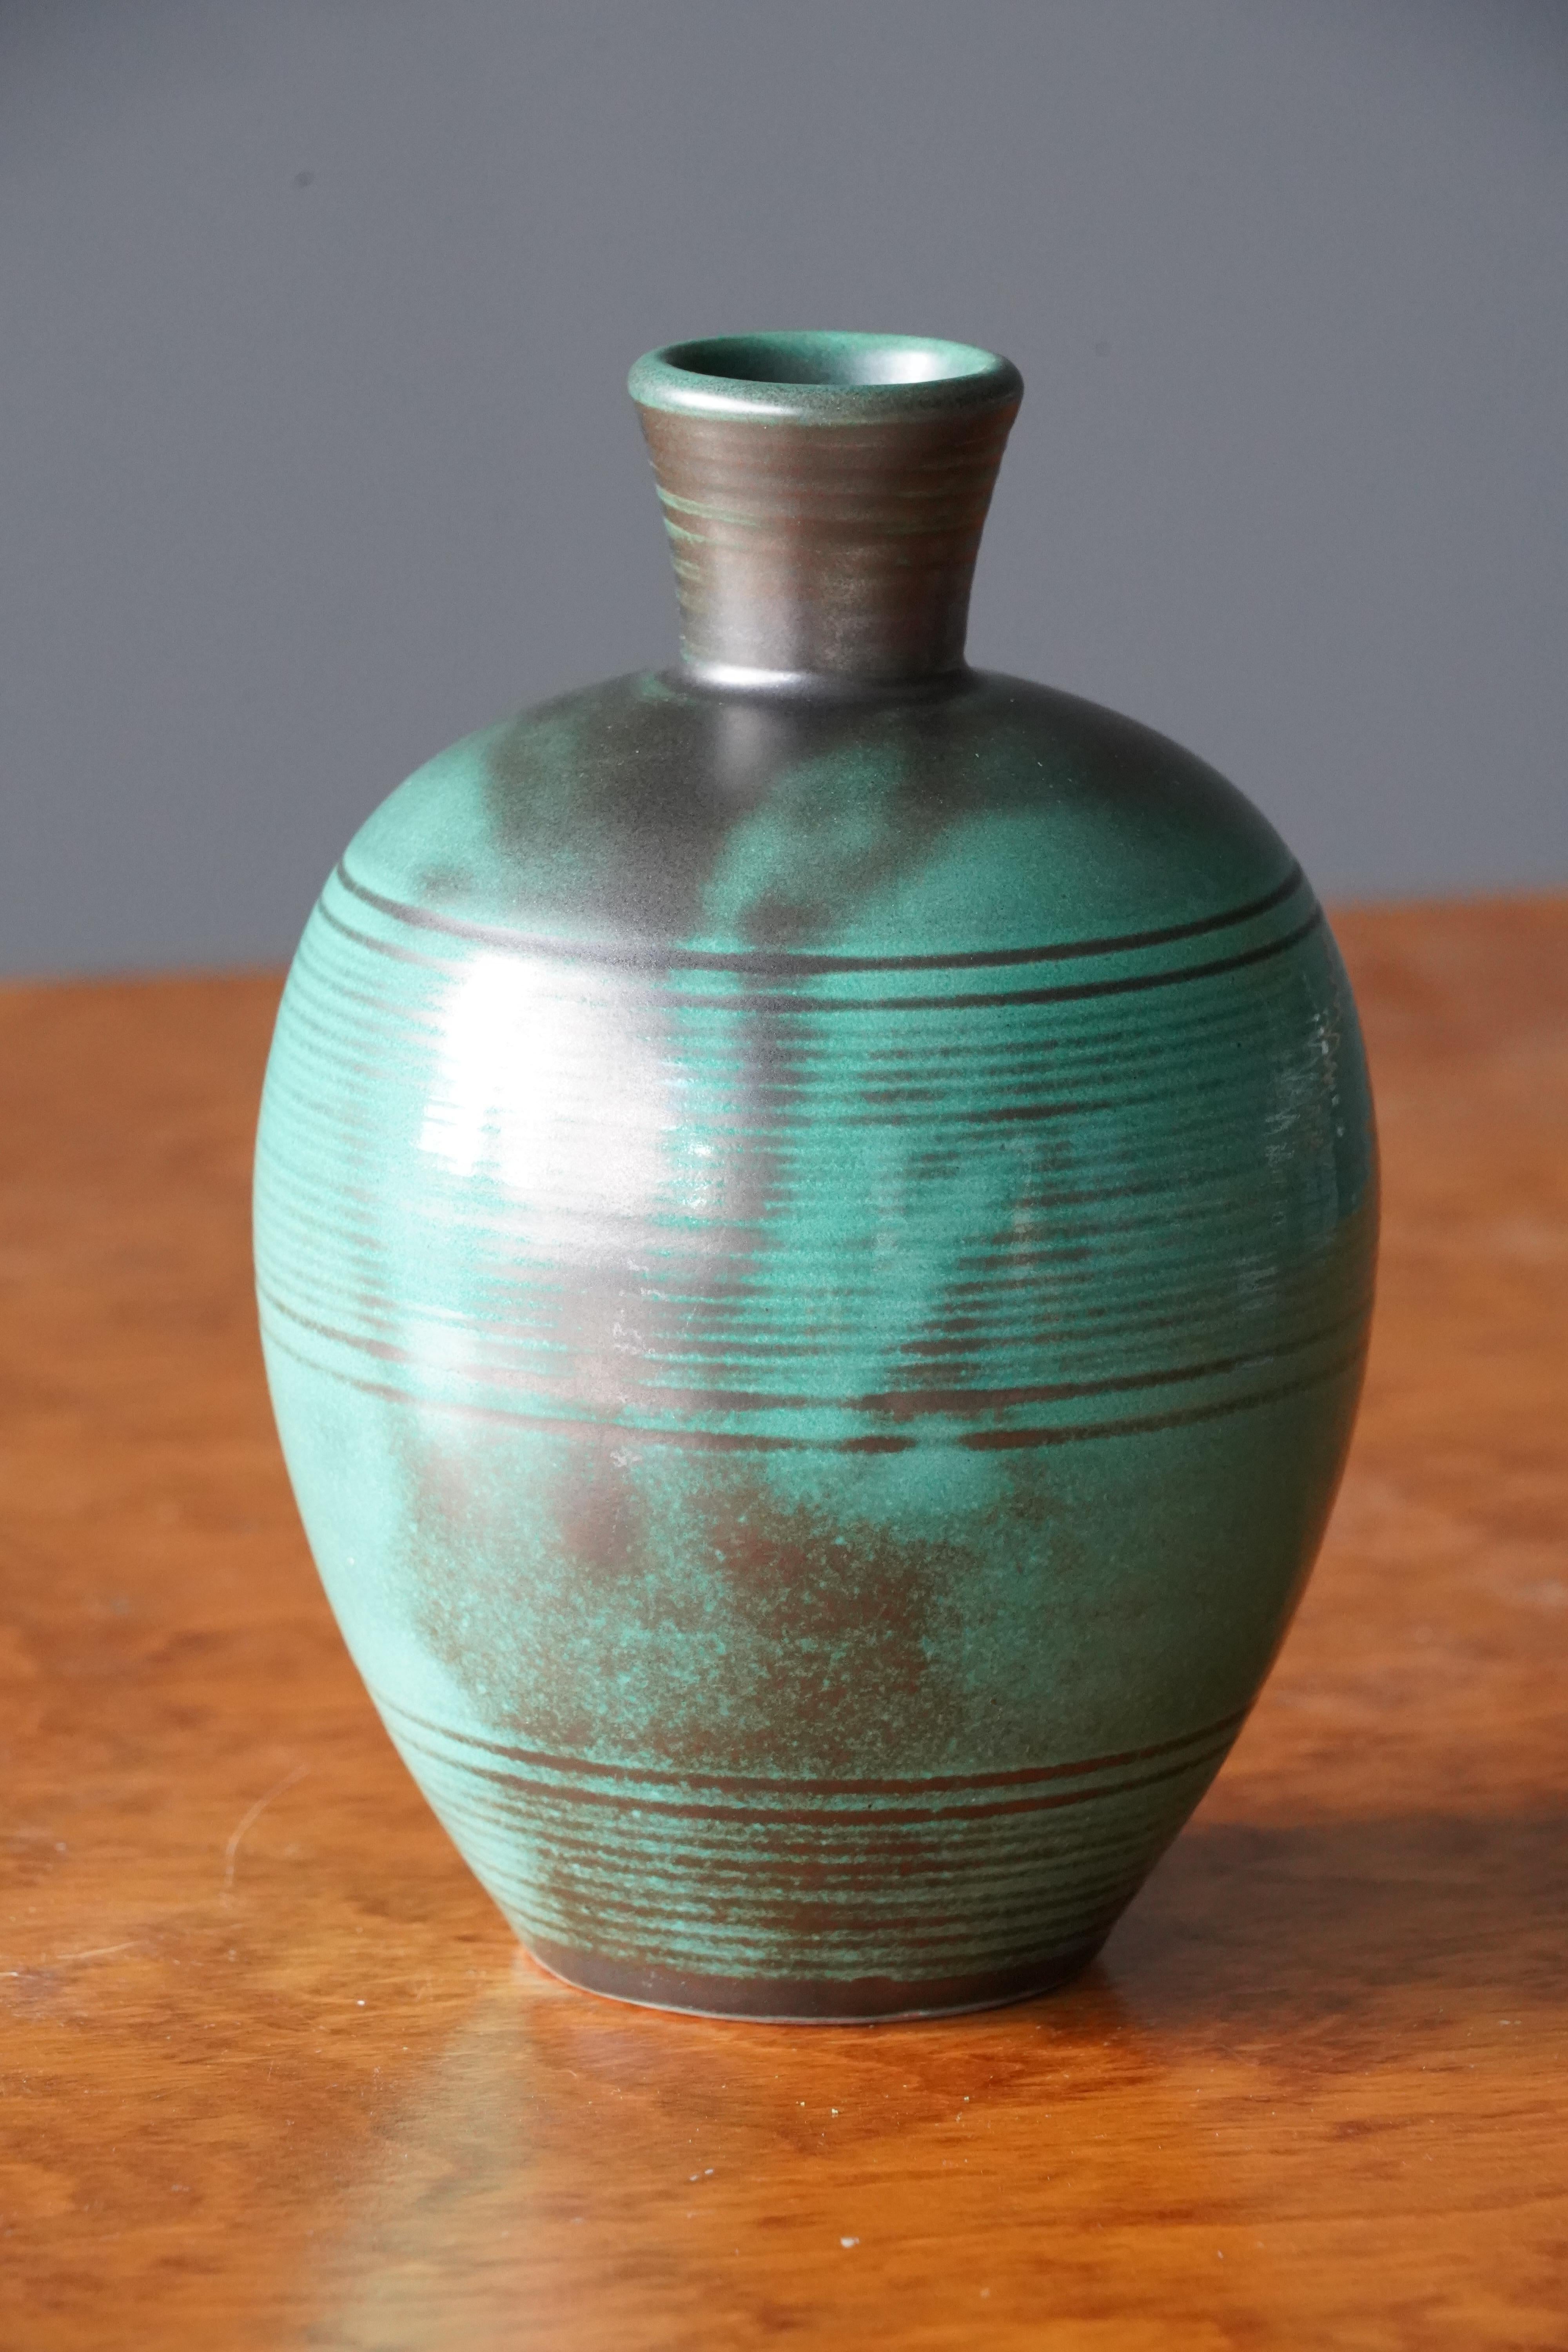 A vase. Produced by Upsala-Ekeby, Sweden, 1940s. Earthenware..

Other designers of the period include Ettore Sottsass, Carl Harry Stålhane, Lisa Larsson, Axel Salto, and Arne Bang.